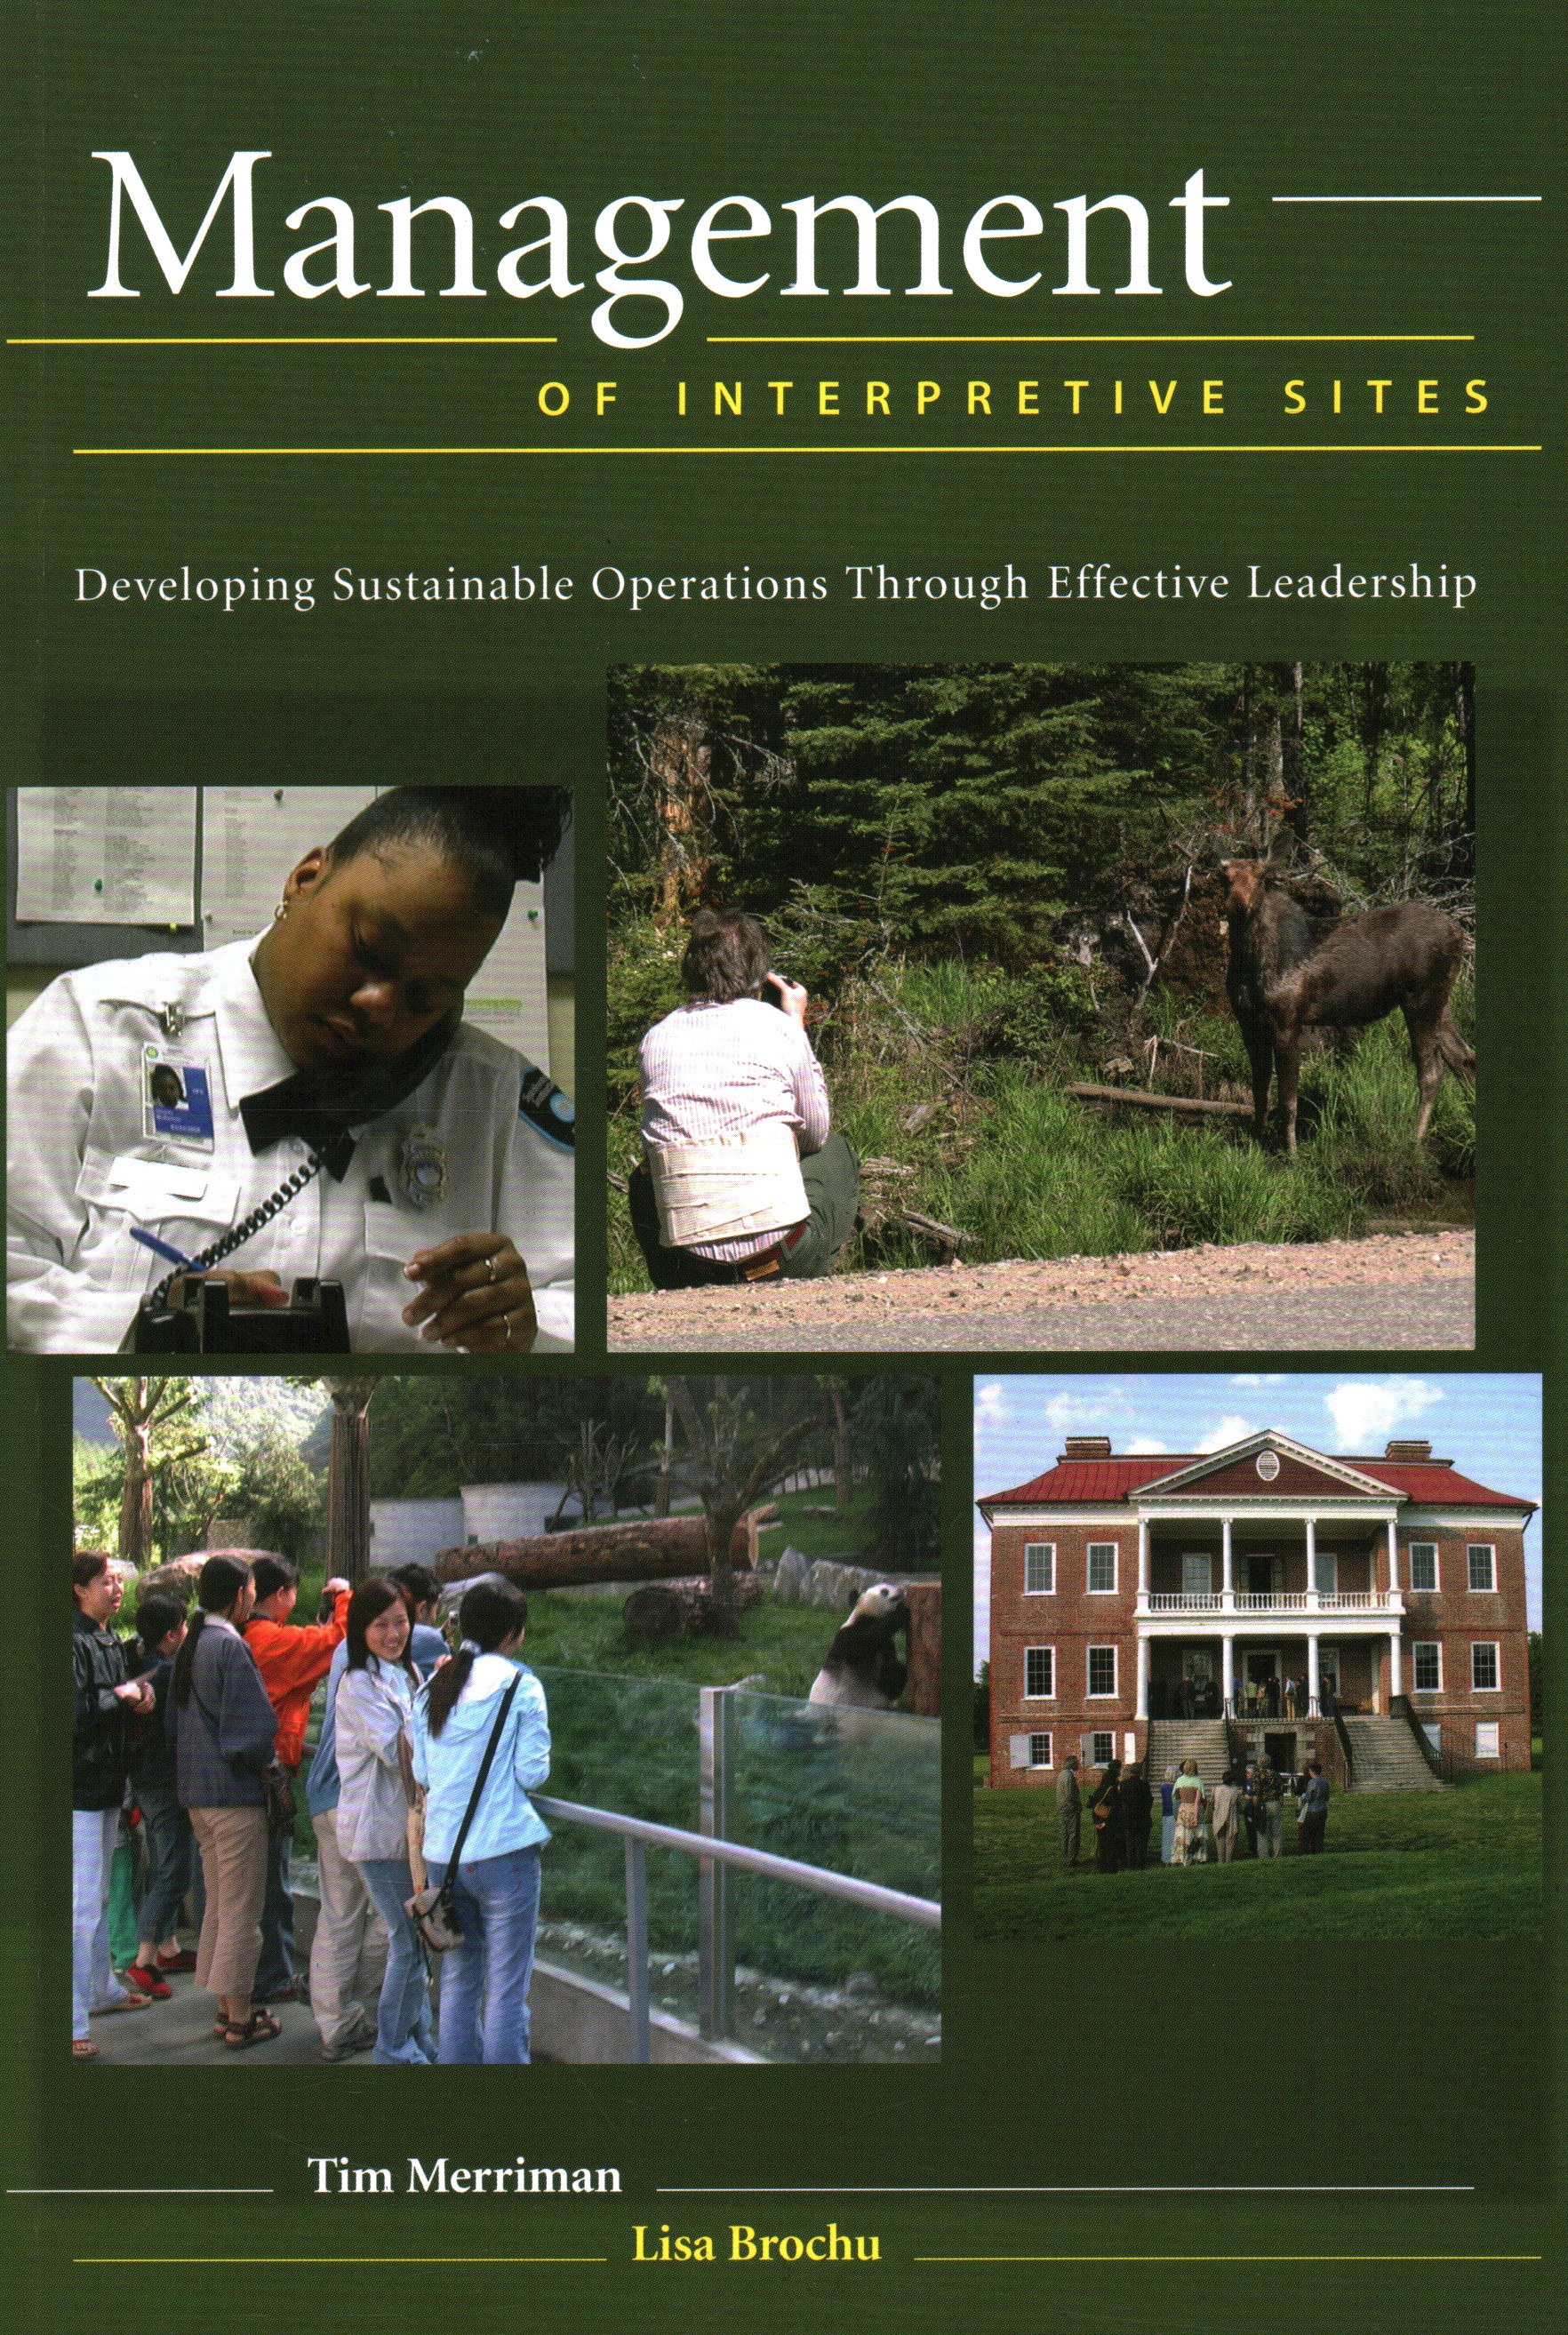 Management of Interpretive Sites: Developing Sustainable Operations Through Effective Leadership